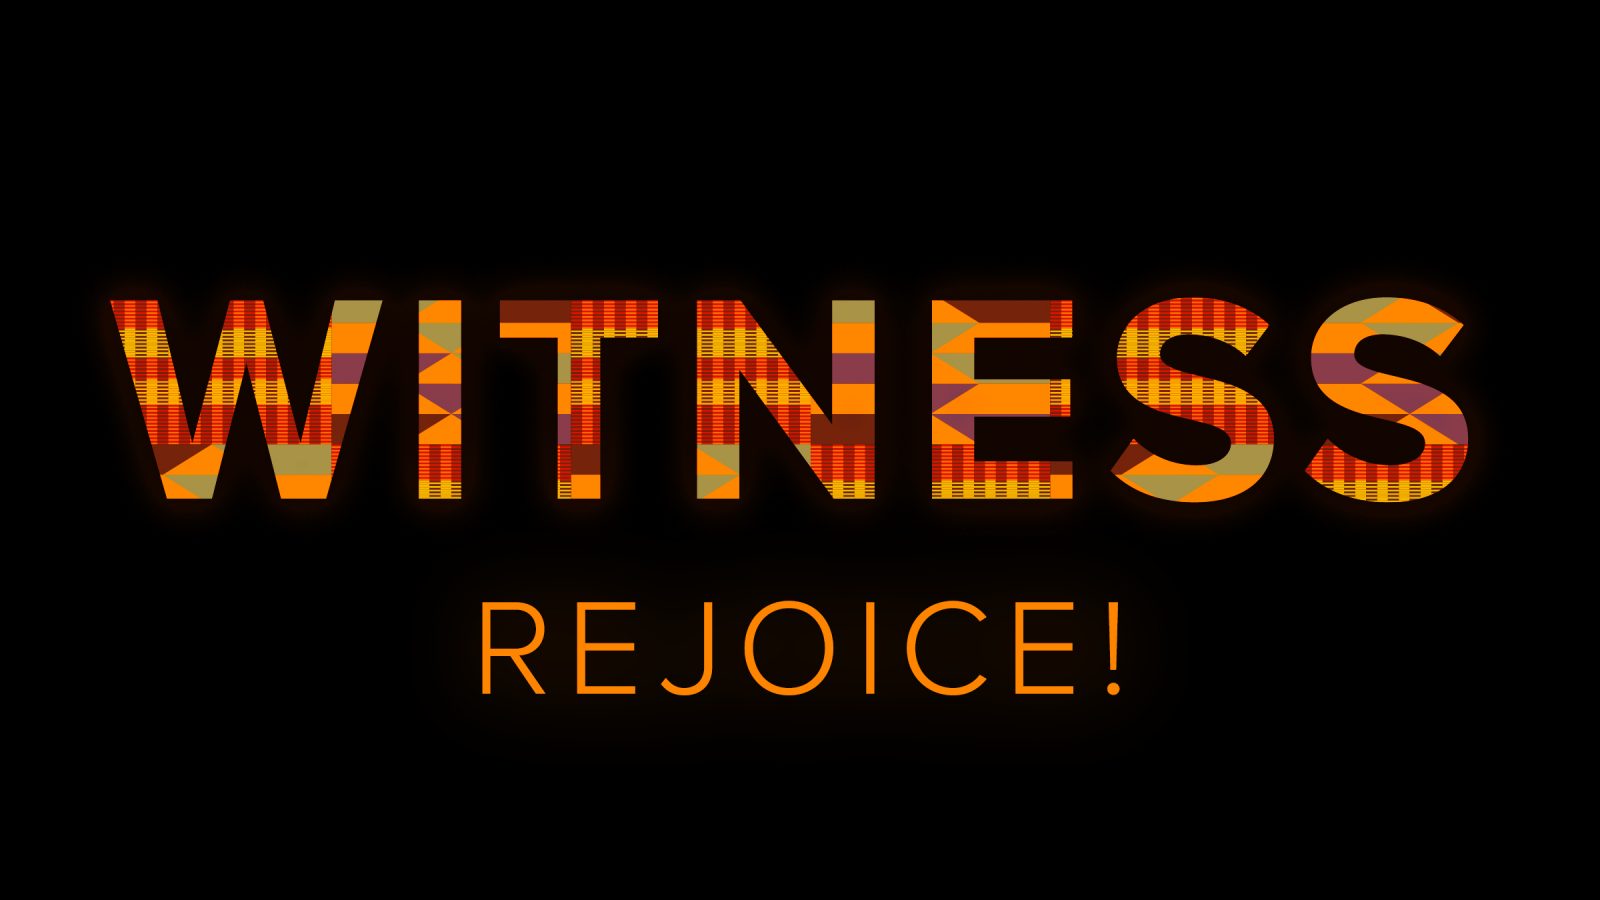 WITNESS with Kente Cloth Pattern and Rejoice!